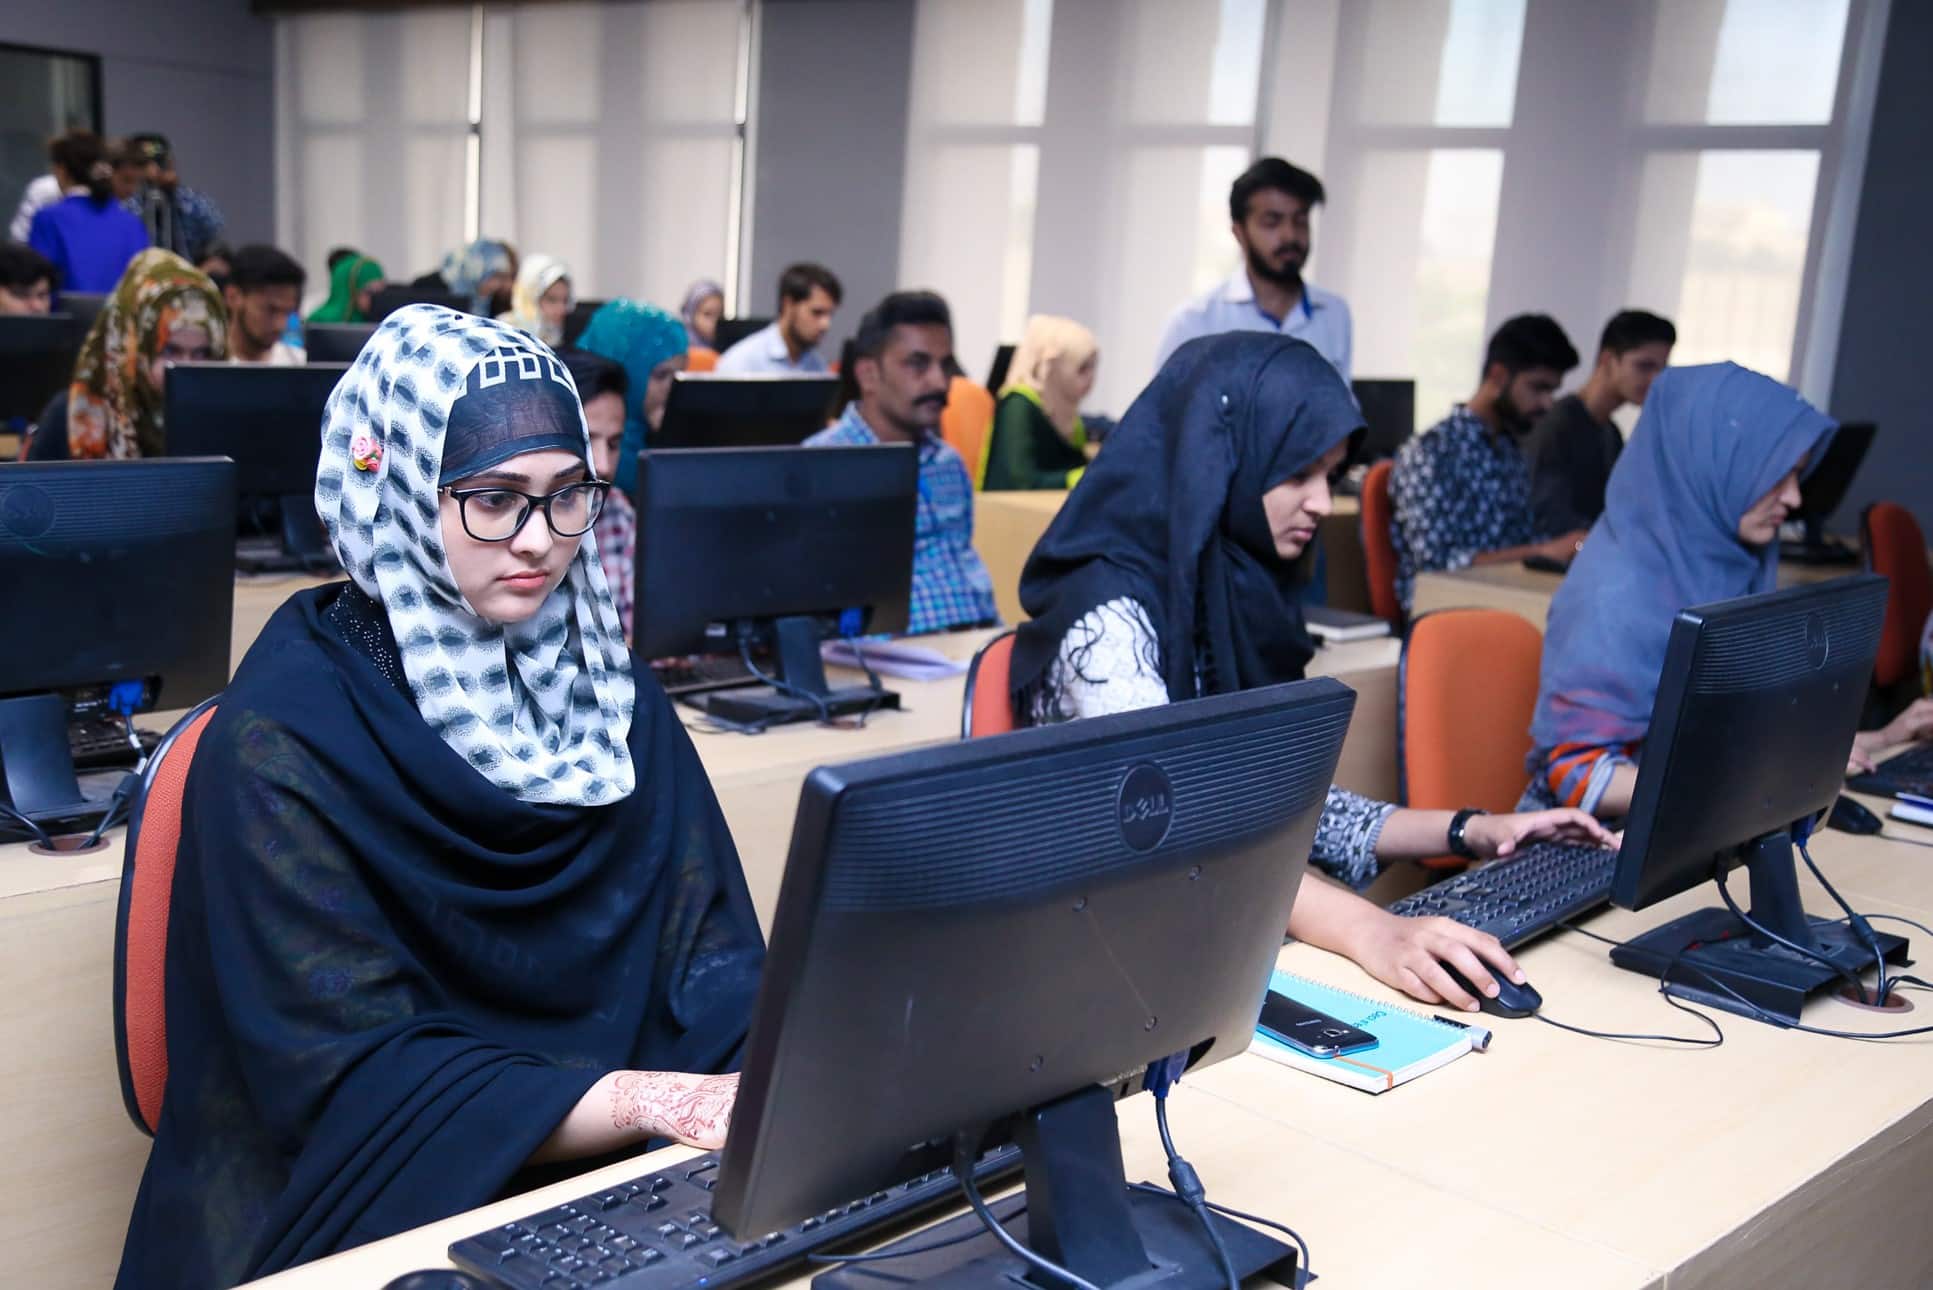 “Women in South Asia have a hard time convincing their families that they want a career in tech”